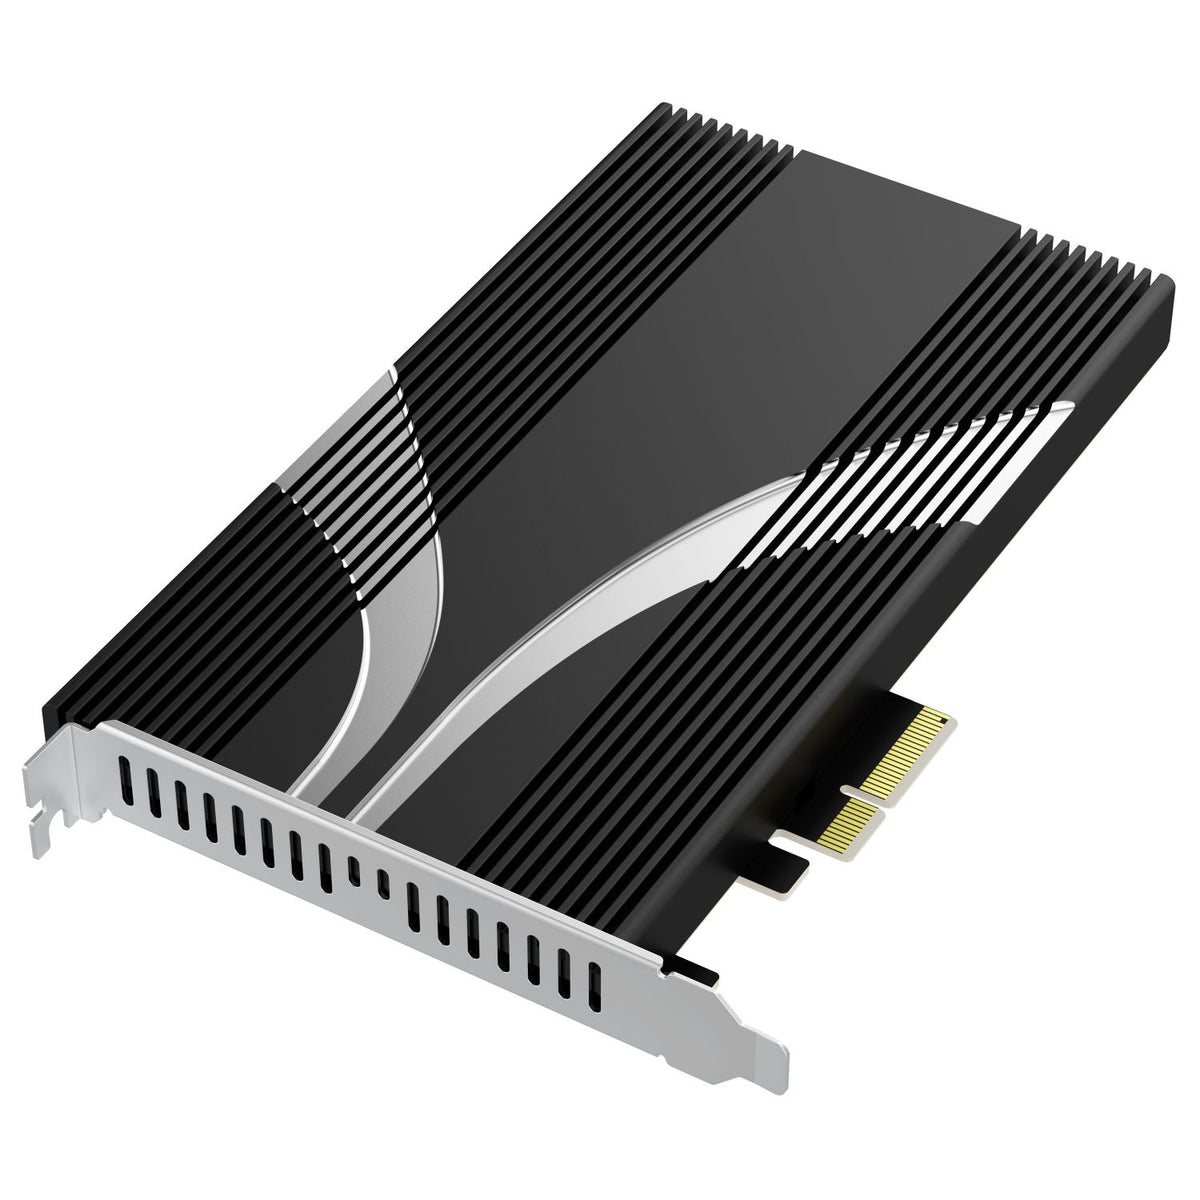 4-Drive M.2 NVMe SSD to PCIe 3.0 x4 Adapter Card